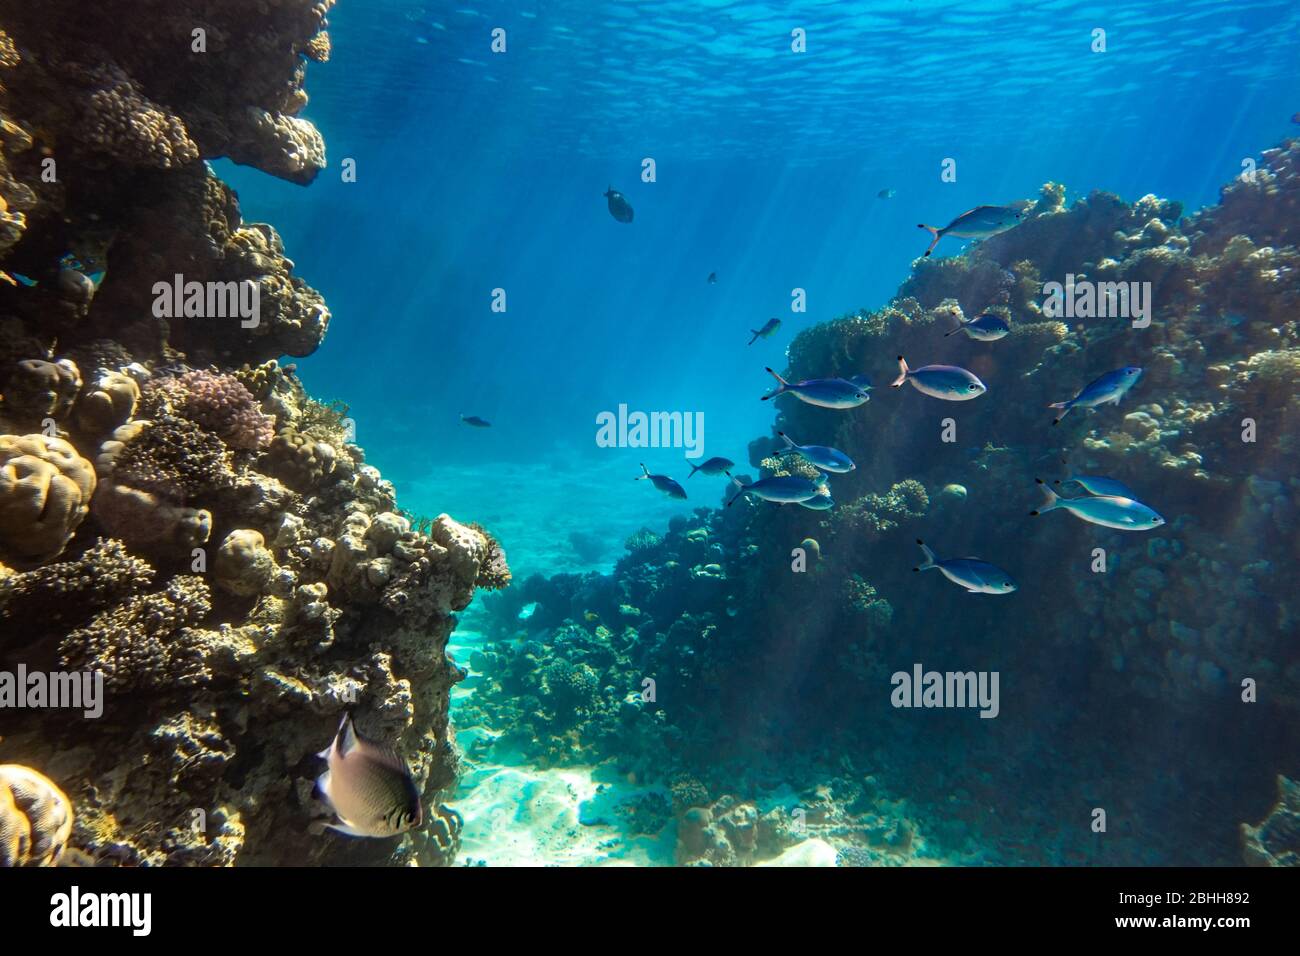 Coral Reef And Shoal Of Bright Blue Stripped Tropical Fish In Red Sea. Blue Lunar Fusilier (Caesio Lunaris), Hard Corals And Rock In The Depths, Sun R Stock Photo